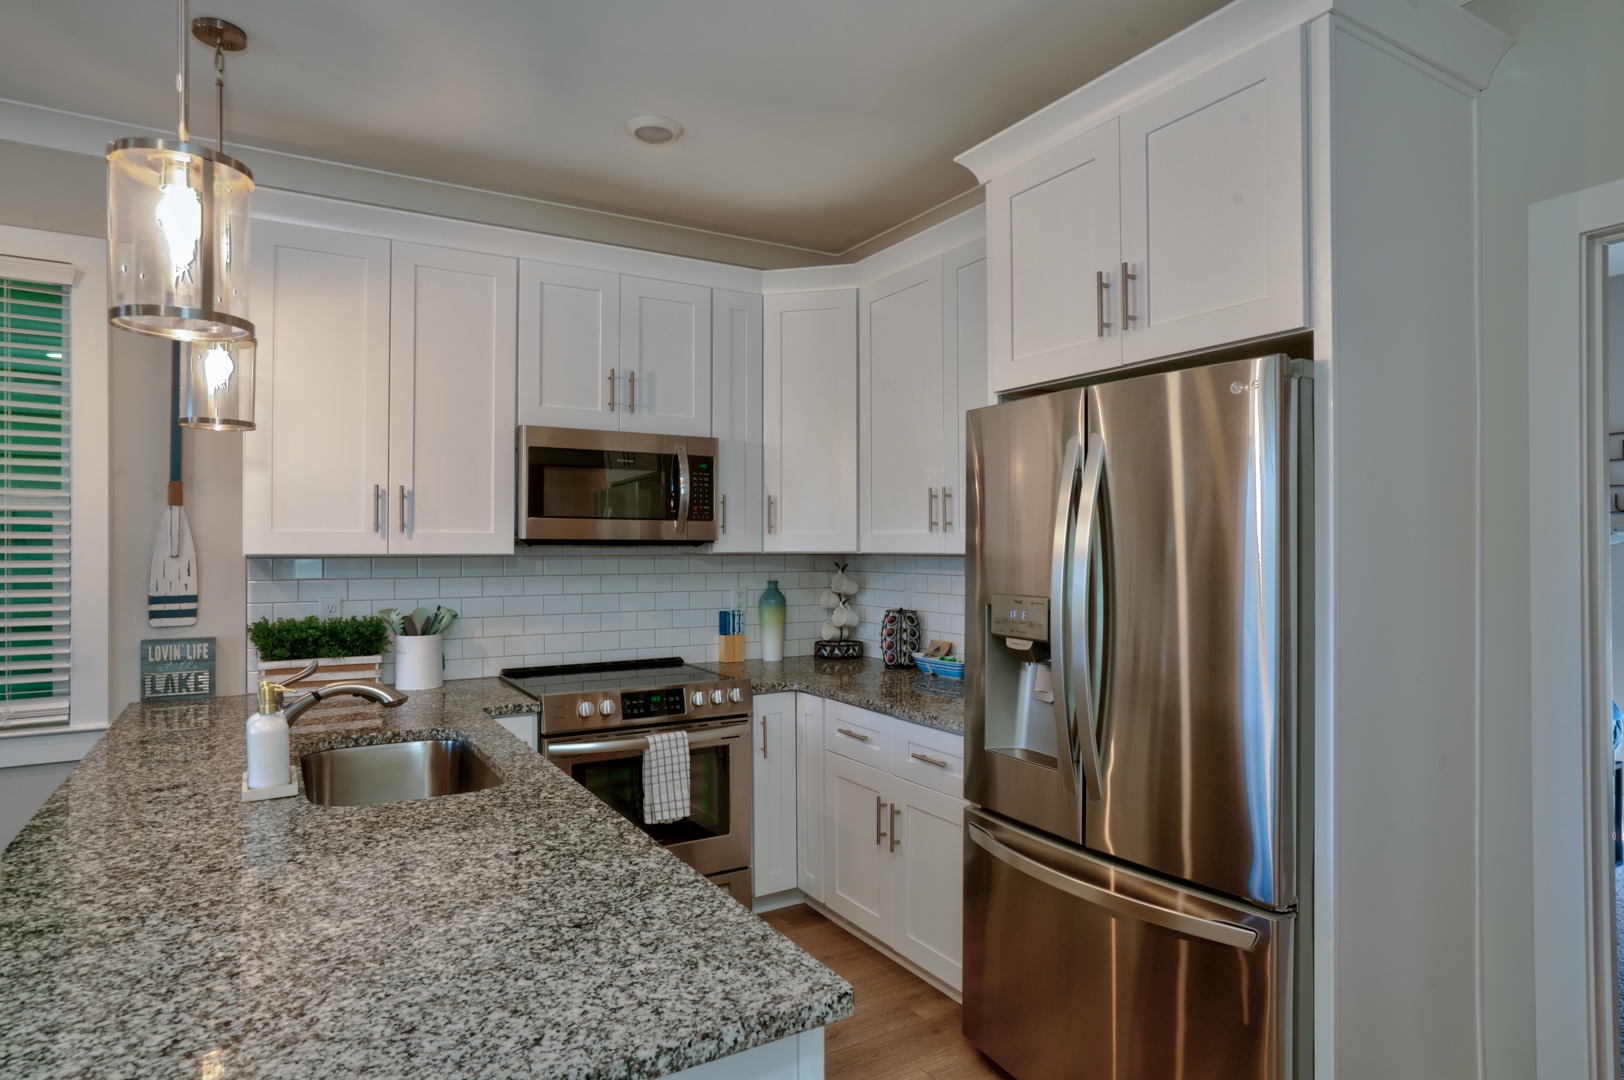 The chic, updated kitchen offers loads of space & all the comforts of home